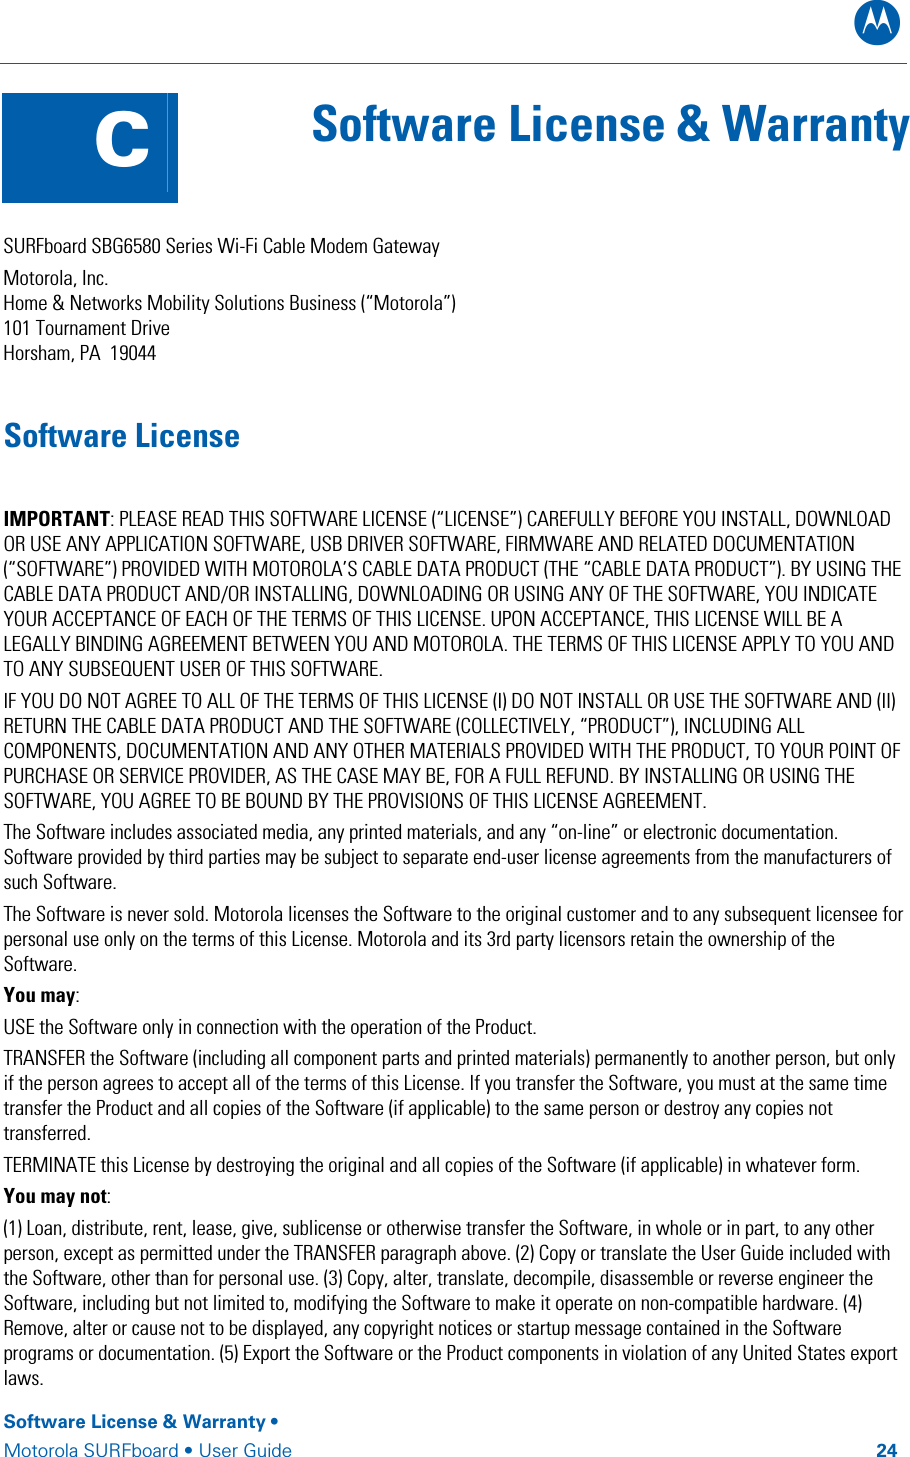 B Software License &amp; Warranty •  Motorola SURFboard • User Guide         24  C  Software License &amp; Warranty   SURFboard SBG6580 Series Wi-Fi Cable Modem Gateway Motorola, Inc.   Home &amp; Networks Mobility Solutions Business (“Motorola”)  101 Tournament Drive Horsham, PA  19044 Software License IMPORTANT: PLEASE READ THIS SOFTWARE LICENSE (“LICENSE”) CAREFULLY BEFORE YOU INSTALL, DOWNLOAD OR USE ANY APPLICATION SOFTWARE, USB DRIVER SOFTWARE, FIRMWARE AND RELATED DOCUMENTATION (“SOFTWARE”) PROVIDED WITH MOTOROLA’S CABLE DATA PRODUCT (THE “CABLE DATA PRODUCT”). BY USING THE CABLE DATA PRODUCT AND/OR INSTALLING, DOWNLOADING OR USING ANY OF THE SOFTWARE, YOU INDICATE YOUR ACCEPTANCE OF EACH OF THE TERMS OF THIS LICENSE. UPON ACCEPTANCE, THIS LICENSE WILL BE A LEGALLY BINDING AGREEMENT BETWEEN YOU AND MOTOROLA. THE TERMS OF THIS LICENSE APPLY TO YOU AND TO ANY SUBSEQUENT USER OF THIS SOFTWARE.  IF YOU DO NOT AGREE TO ALL OF THE TERMS OF THIS LICENSE (I) DO NOT INSTALL OR USE THE SOFTWARE AND (II) RETURN THE CABLE DATA PRODUCT AND THE SOFTWARE (COLLECTIVELY, “PRODUCT”), INCLUDING ALL COMPONENTS, DOCUMENTATION AND ANY OTHER MATERIALS PROVIDED WITH THE PRODUCT, TO YOUR POINT OF PURCHASE OR SERVICE PROVIDER, AS THE CASE MAY BE, FOR A FULL REFUND. BY INSTALLING OR USING THE SOFTWARE, YOU AGREE TO BE BOUND BY THE PROVISIONS OF THIS LICENSE AGREEMENT. The Software includes associated media, any printed materials, and any “on-line” or electronic documentation. Software provided by third parties may be subject to separate end-user license agreements from the manufacturers of such Software. The Software is never sold. Motorola licenses the Software to the original customer and to any subsequent licensee for personal use only on the terms of this License. Motorola and its 3rd party licensors retain the ownership of the Software.  You may: USE the Software only in connection with the operation of the Product.  TRANSFER the Software (including all component parts and printed materials) permanently to another person, but only if the person agrees to accept all of the terms of this License. If you transfer the Software, you must at the same time transfer the Product and all copies of the Software (if applicable) to the same person or destroy any copies not transferred.  TERMINATE this License by destroying the original and all copies of the Software (if applicable) in whatever form. You may not: (1) Loan, distribute, rent, lease, give, sublicense or otherwise transfer the Software, in whole or in part, to any other person, except as permitted under the TRANSFER paragraph above. (2) Copy or translate the User Guide included with the Software, other than for personal use. (3) Copy, alter, translate, decompile, disassemble or reverse engineer the Software, including but not limited to, modifying the Software to make it operate on non-compatible hardware. (4) Remove, alter or cause not to be displayed, any copyright notices or startup message contained in the Software programs or documentation. (5) Export the Software or the Product components in violation of any United States export laws. 